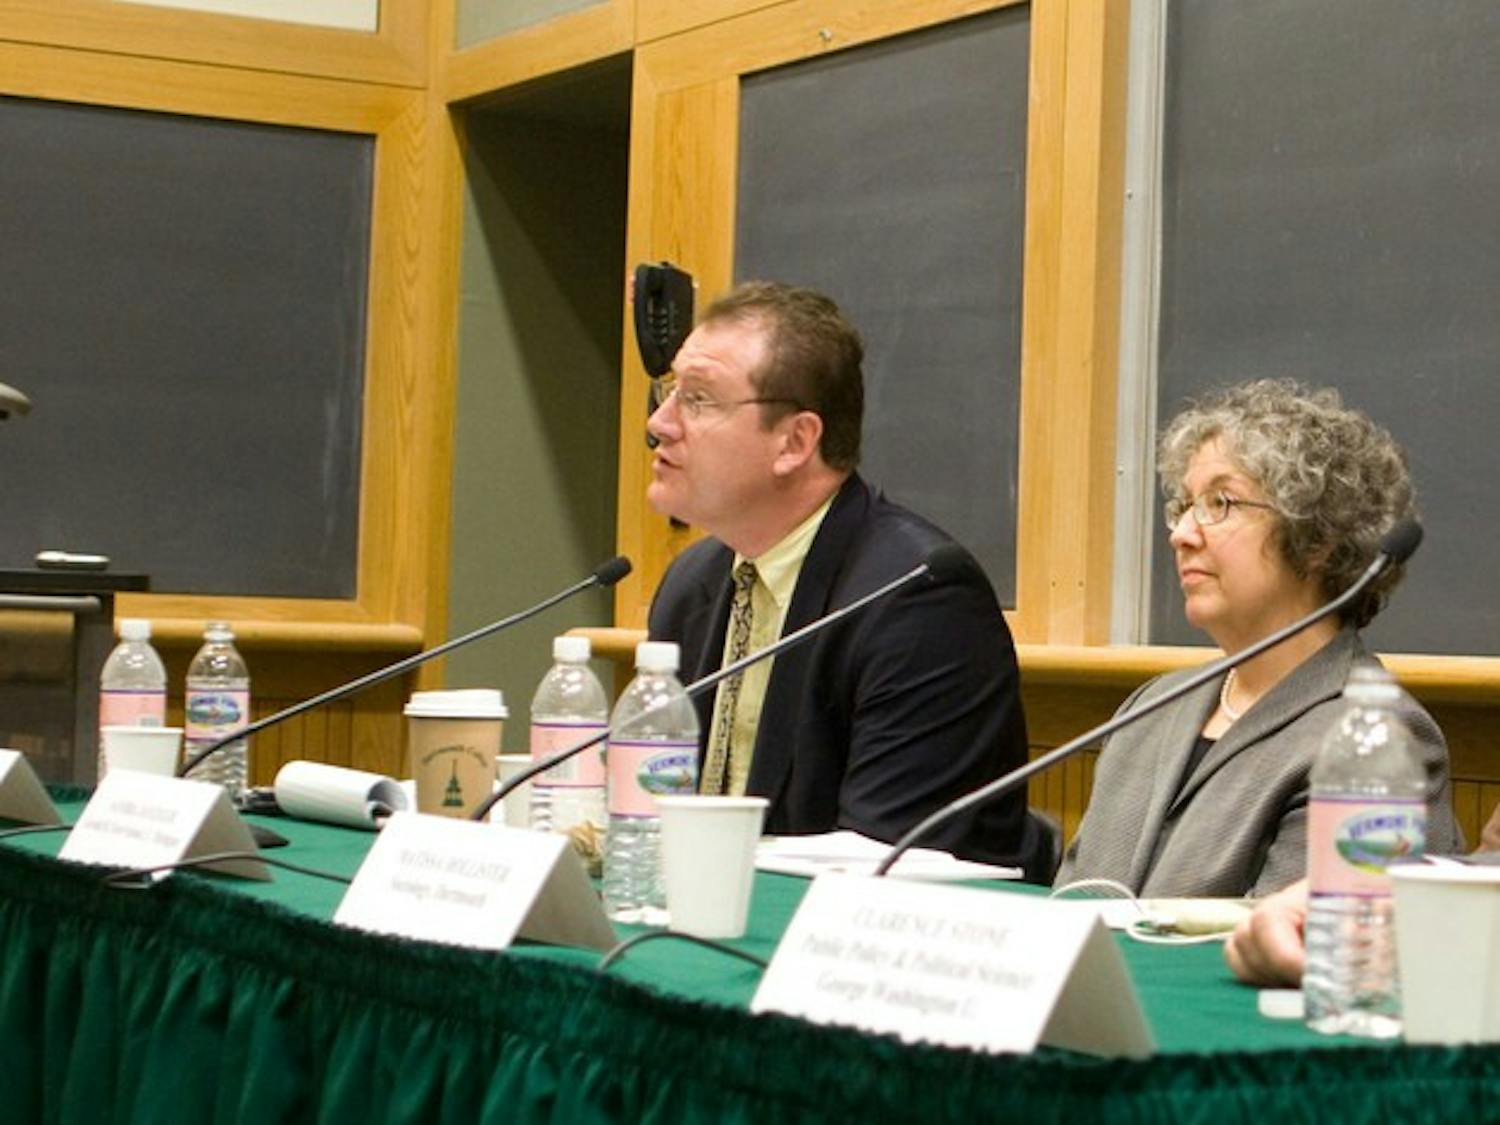 Experts analyze multiple aspects of poverty and conceptions of poverty at a Rockefeller Center panel on Monday.